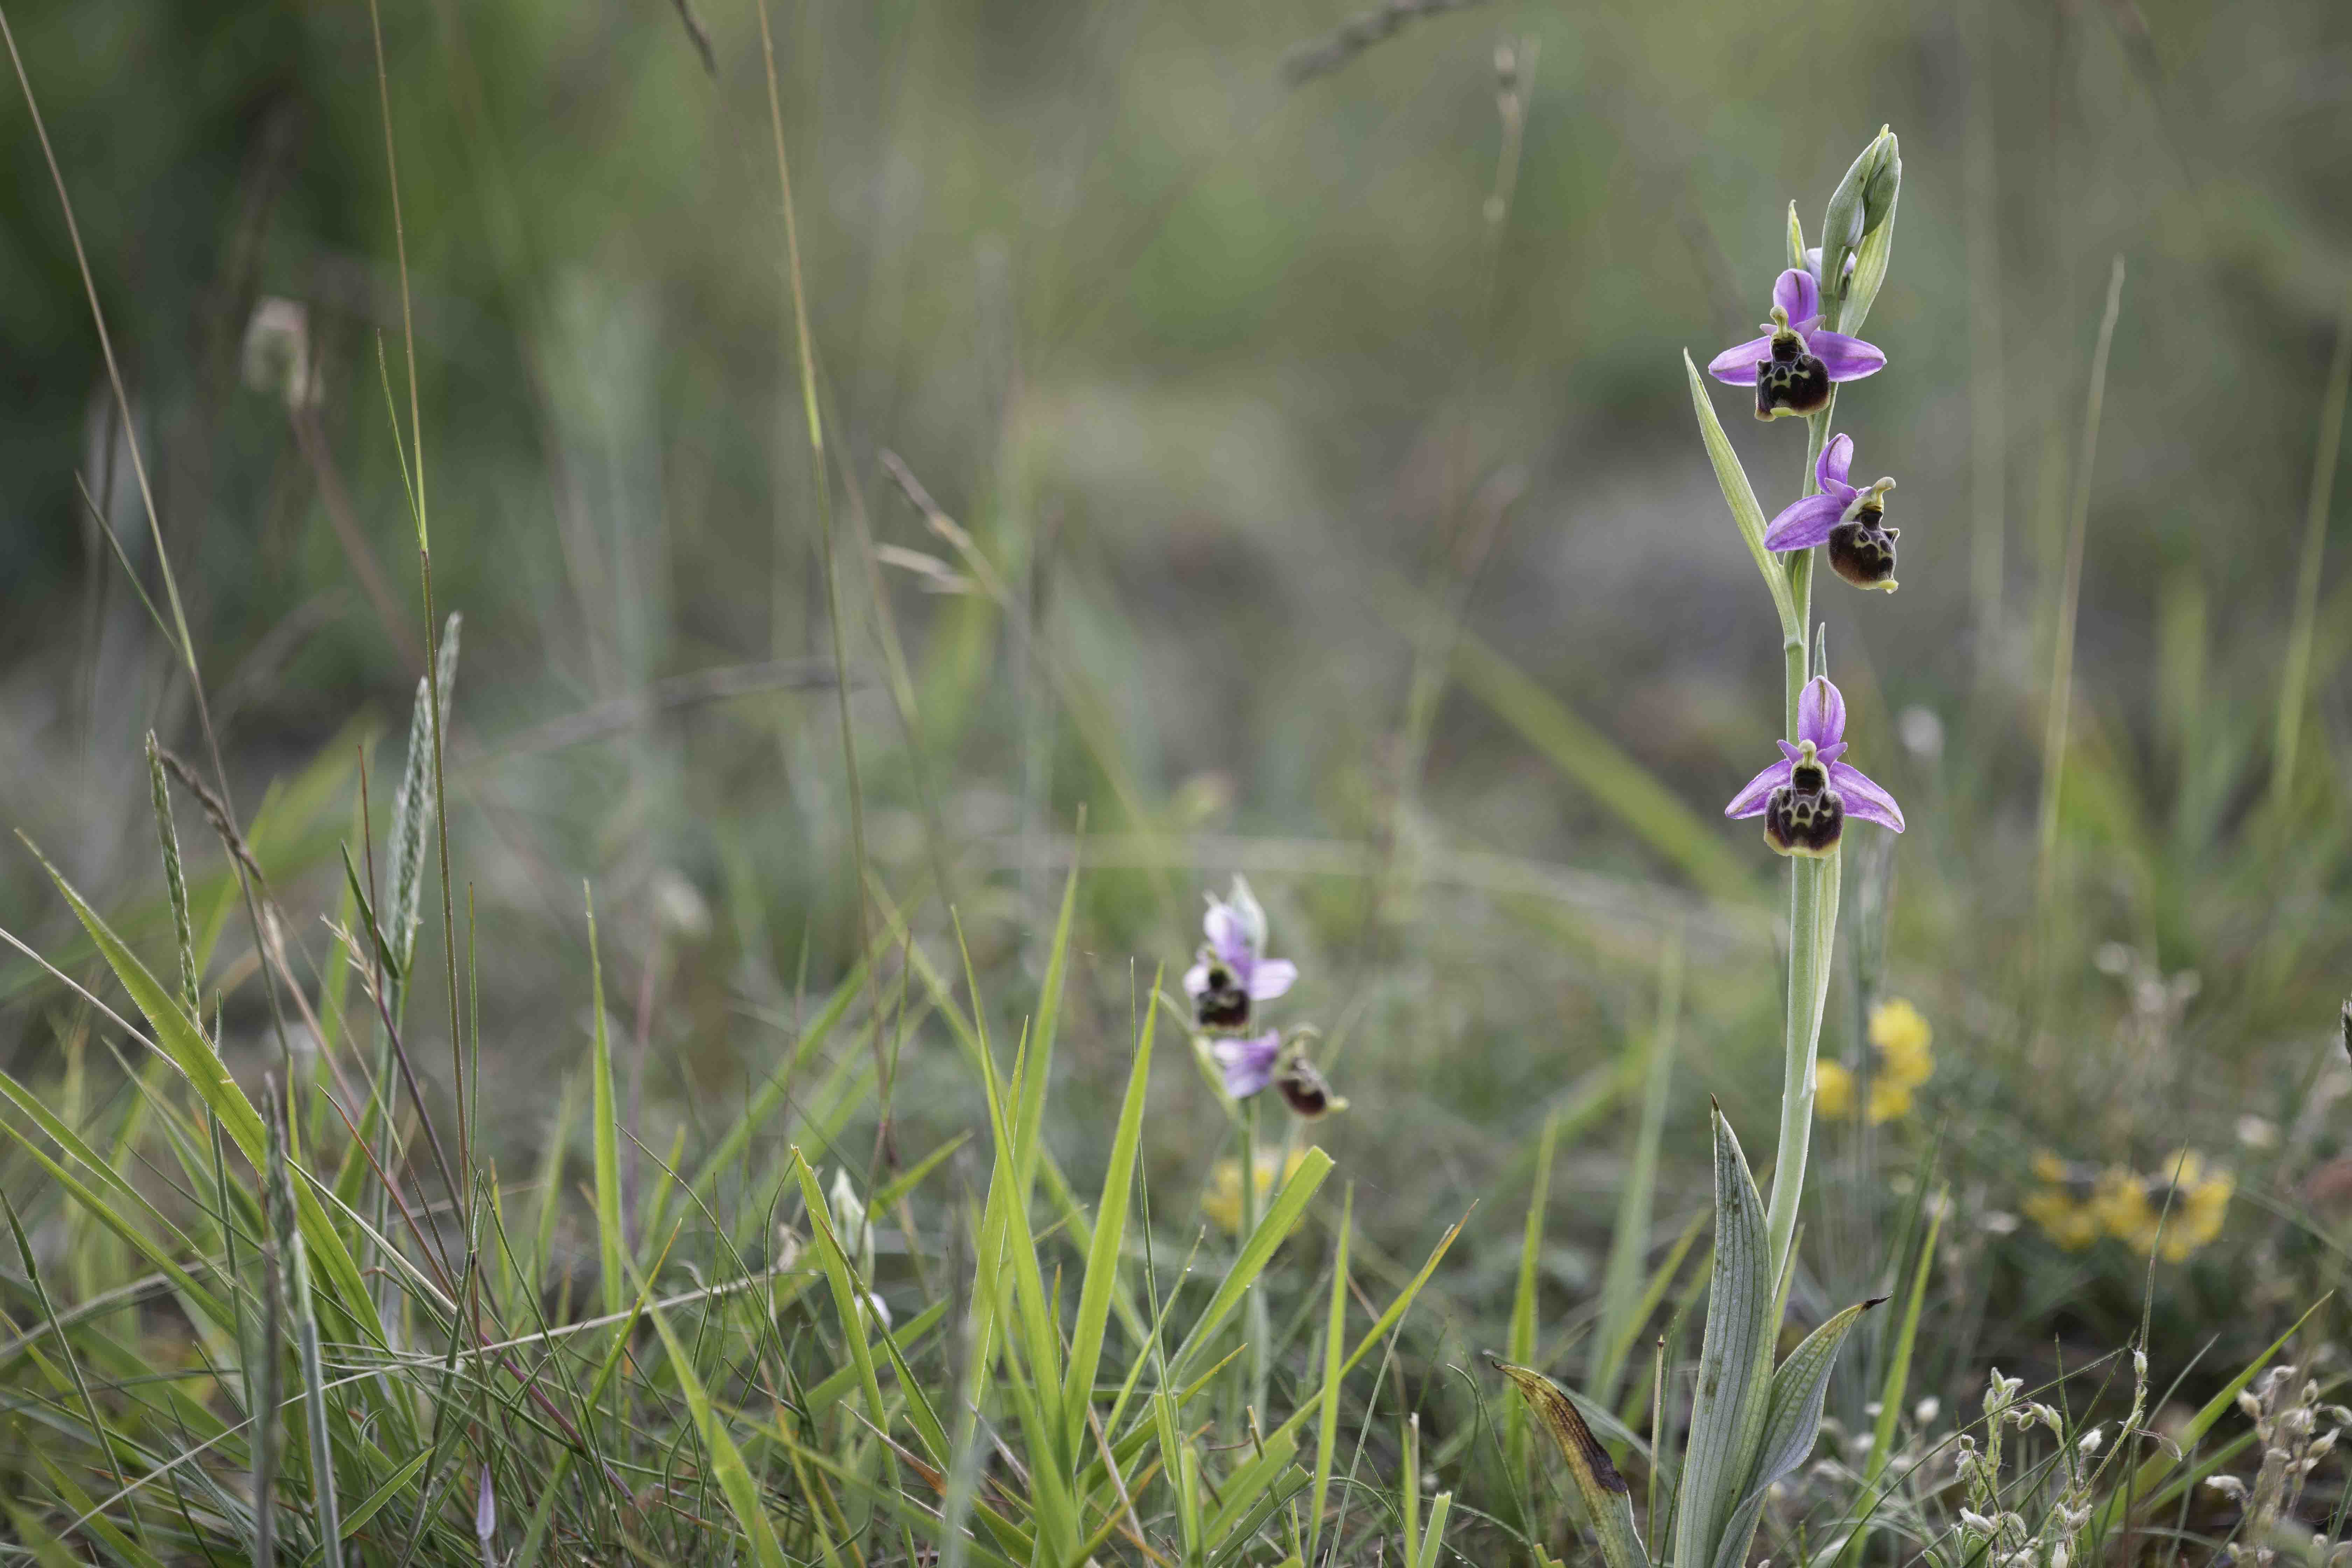 Hommelorchis (Ophrys fuciflora)